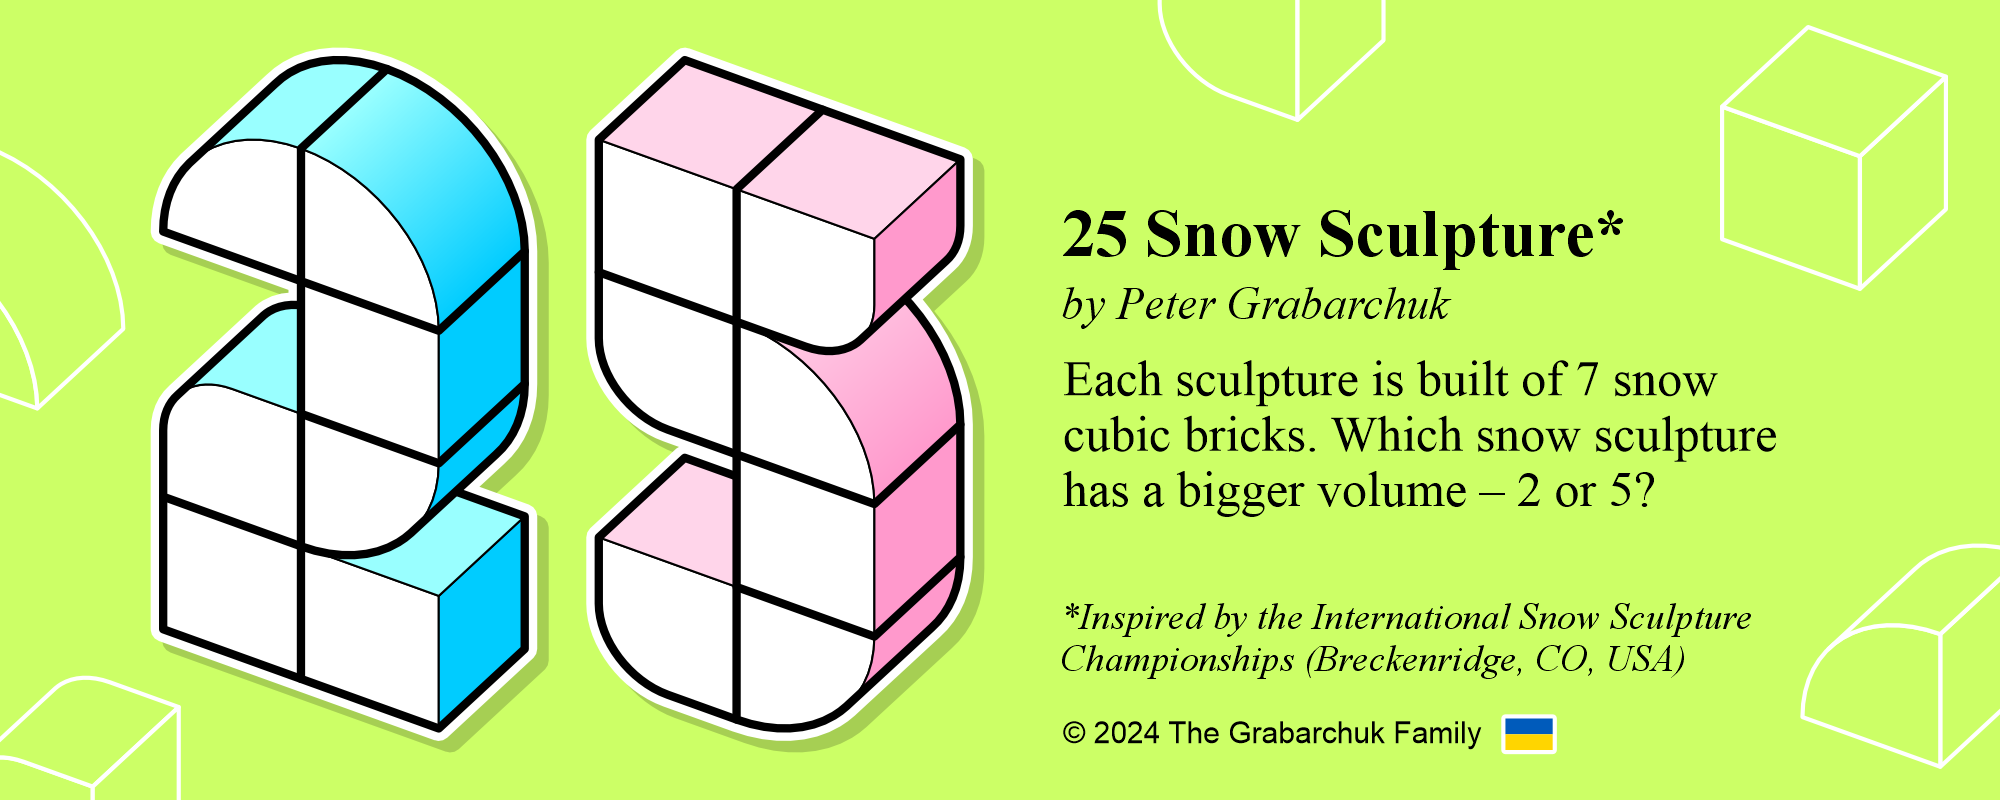 25 Snow Sculpture by Peter Grabarchuk